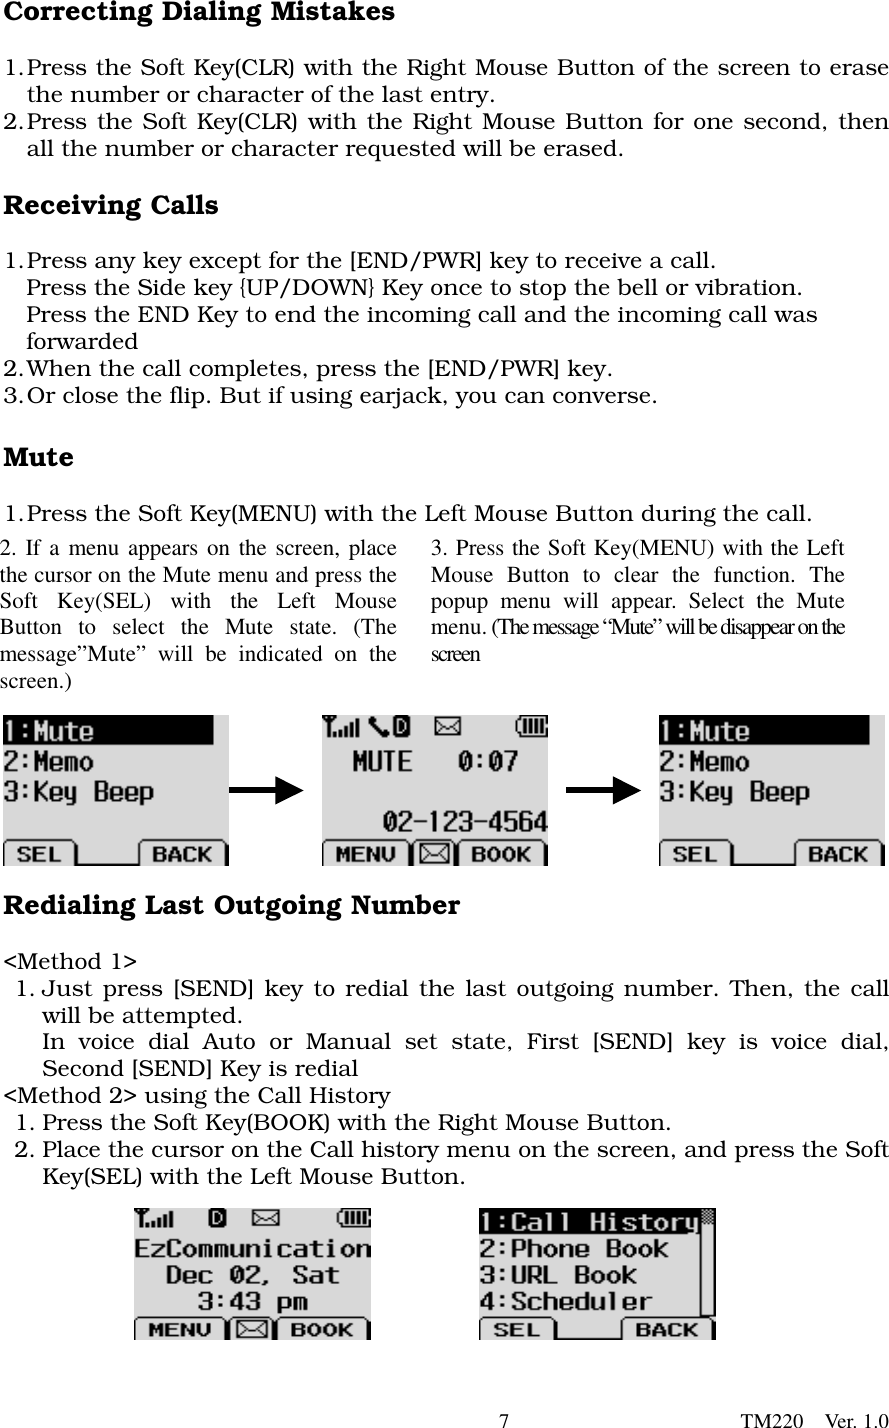        7                      TM220  Ver. 1.0 Correcting Dialing Mistakes  1. Press the Soft Key(CLR) with the Right Mouse Button of the screen to erase the number or character of the last entry.   2. Press the Soft Key(CLR) with the Right Mouse Button for one second, then all the number or character requested will be erased.    Receiving Calls  1. Press any key except for the [END/PWR] key to receive a call.           Press the Side key {UP/DOWN} Key once to stop the bell or vibration.     Press the END Key to end the incoming call and the incoming call was   forwarded 2. When the call completes, press the [END/PWR] key.   3. Or close the flip. But if using earjack, you can converse.    Mute  1. Press the Soft Key(MENU) with the Left Mouse Button during the call.            Redialing Last Outgoing Number  &lt;Method 1&gt;   1. Just press [SEND] key to redial the last outgoing number. Then, the call will be attempted. In voice dial Auto or Manual set state, First [SEND] key is voice dial, Second [SEND] Key is redial &lt;Method 2&gt; using the Call History 1. Press the Soft Key(BOOK) with the Right Mouse Button.   2. Place the cursor on the Call history menu on the screen, and press the Soft Key(SEL) with the Left Mouse Button.         2. If a menu appears on the screen, placethe cursor on the Mute menu and press theSoft Key(SEL) with the Left MouseButton to select the Mute state. (Themessage”Mute” will be indicated on thescreen.)   3. Press the Soft Key(MENU) with the LeftMouse Button to clear the function. Thepopup menu will appear. Select the Mutemenu. (The message “Mute”will be disappear on thescreen   